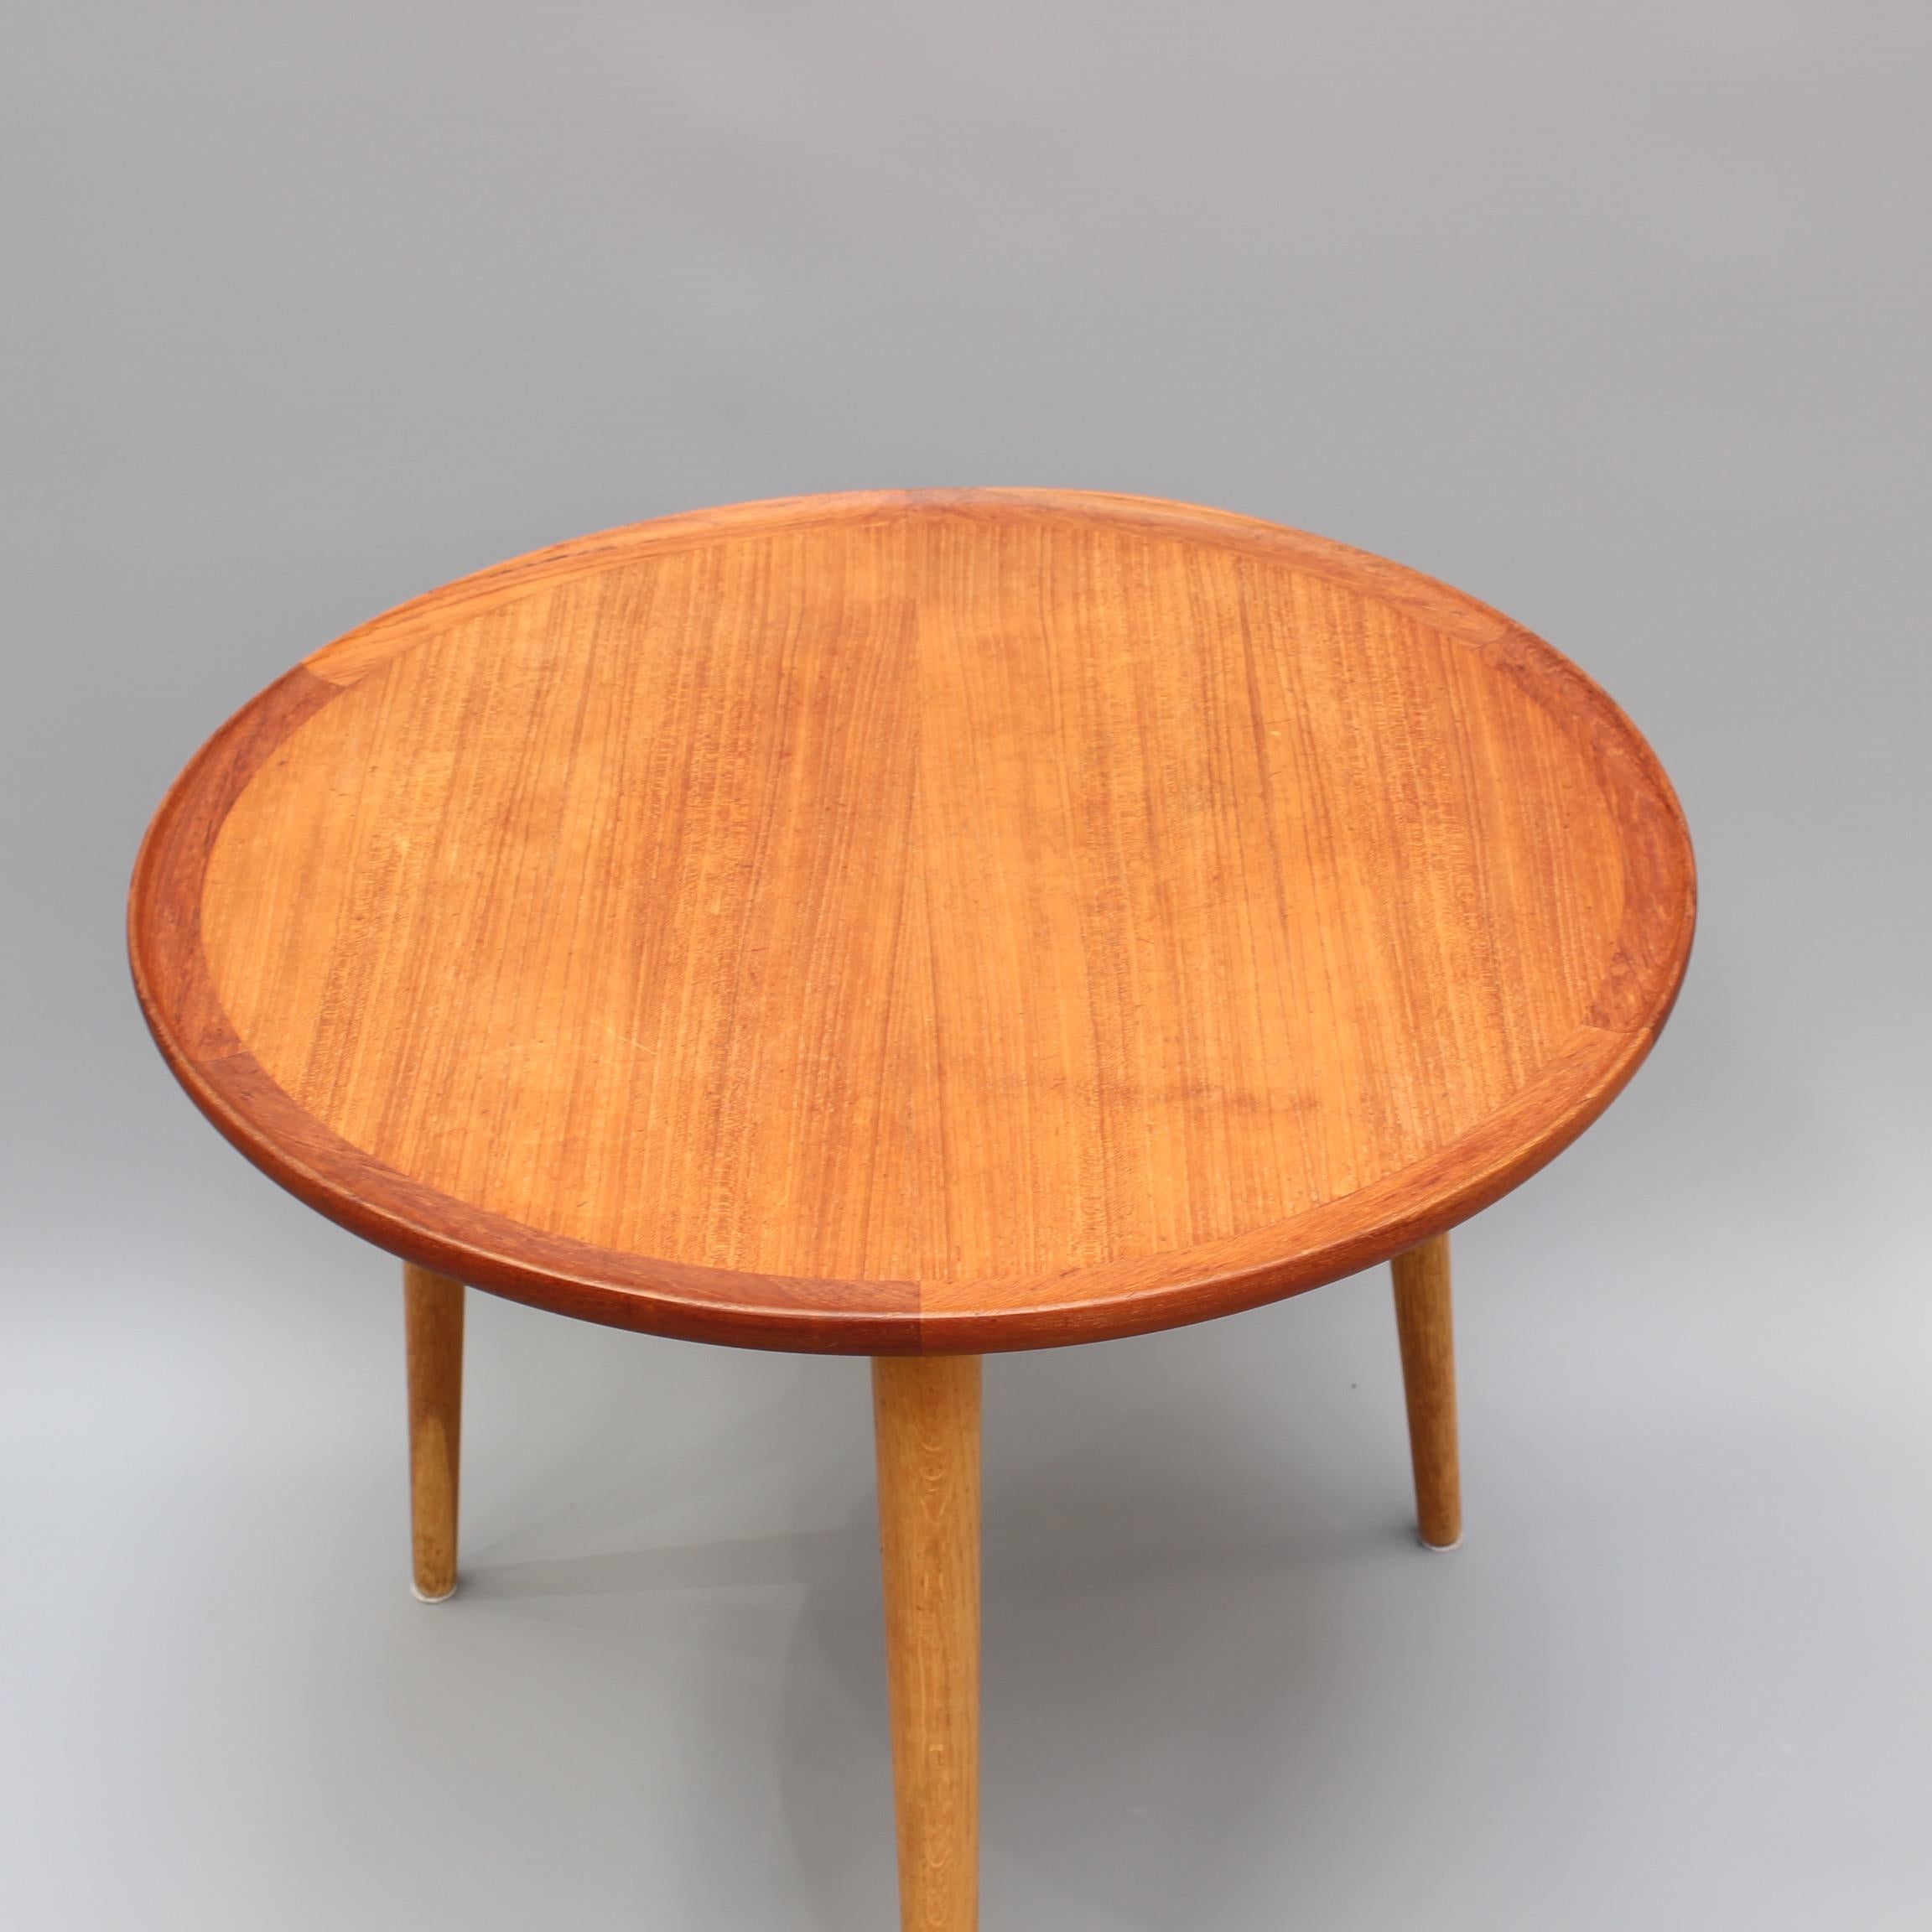 Mid-Century Modern Danish circular teak end table, circa 1960s. A sturdy, mid-weight, three-legged end table which is sure to be a conversation piece in any room in which it is placed. Commensurate with its age, there are characterful markings on